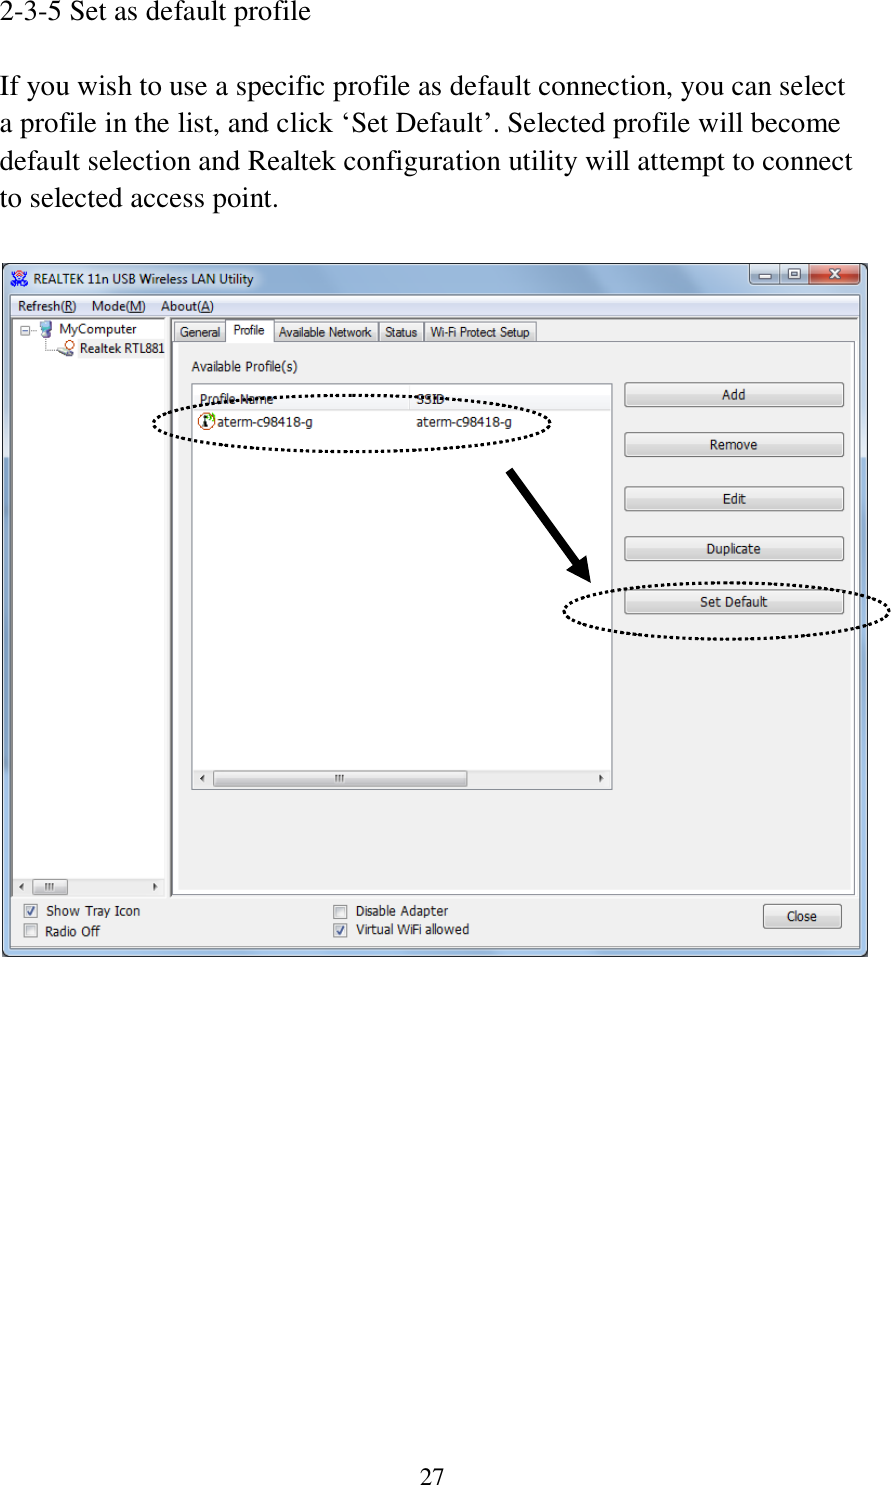  27 2-3-5 Set as default profile  If you wish to use a specific profile as default connection, you can select a profile in the list, and click ‘Set Default’. Selected profile will become default selection and Realtek configuration utility will attempt to connect to selected access point.      